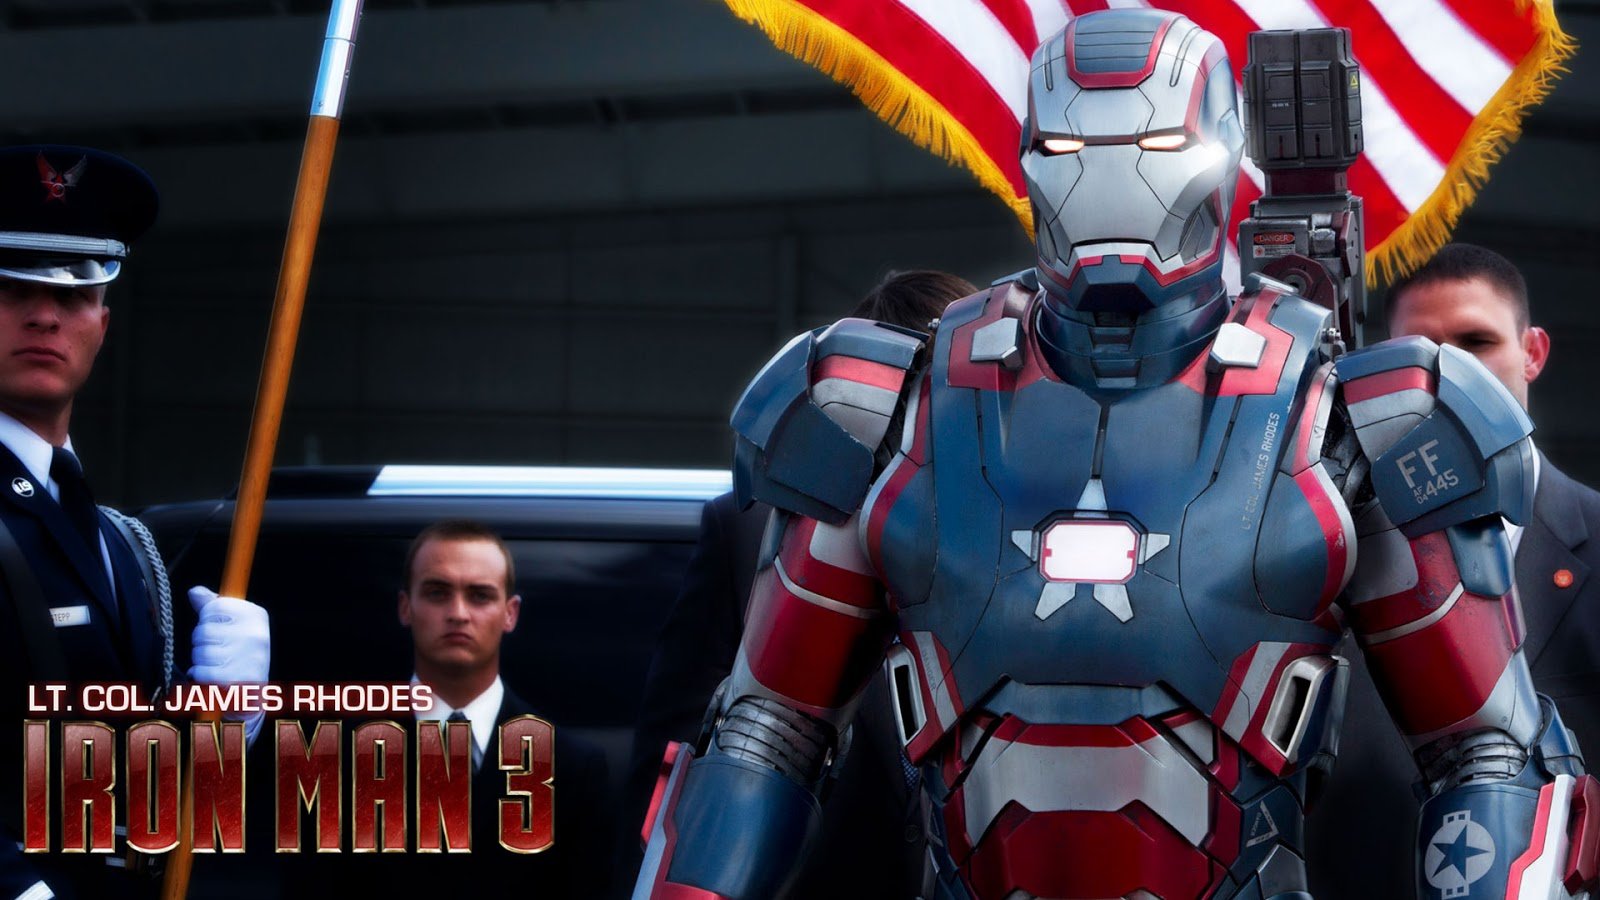 Iron Man 3 2013 HD wallpapers 1080p   HD Wallpapers High Definition